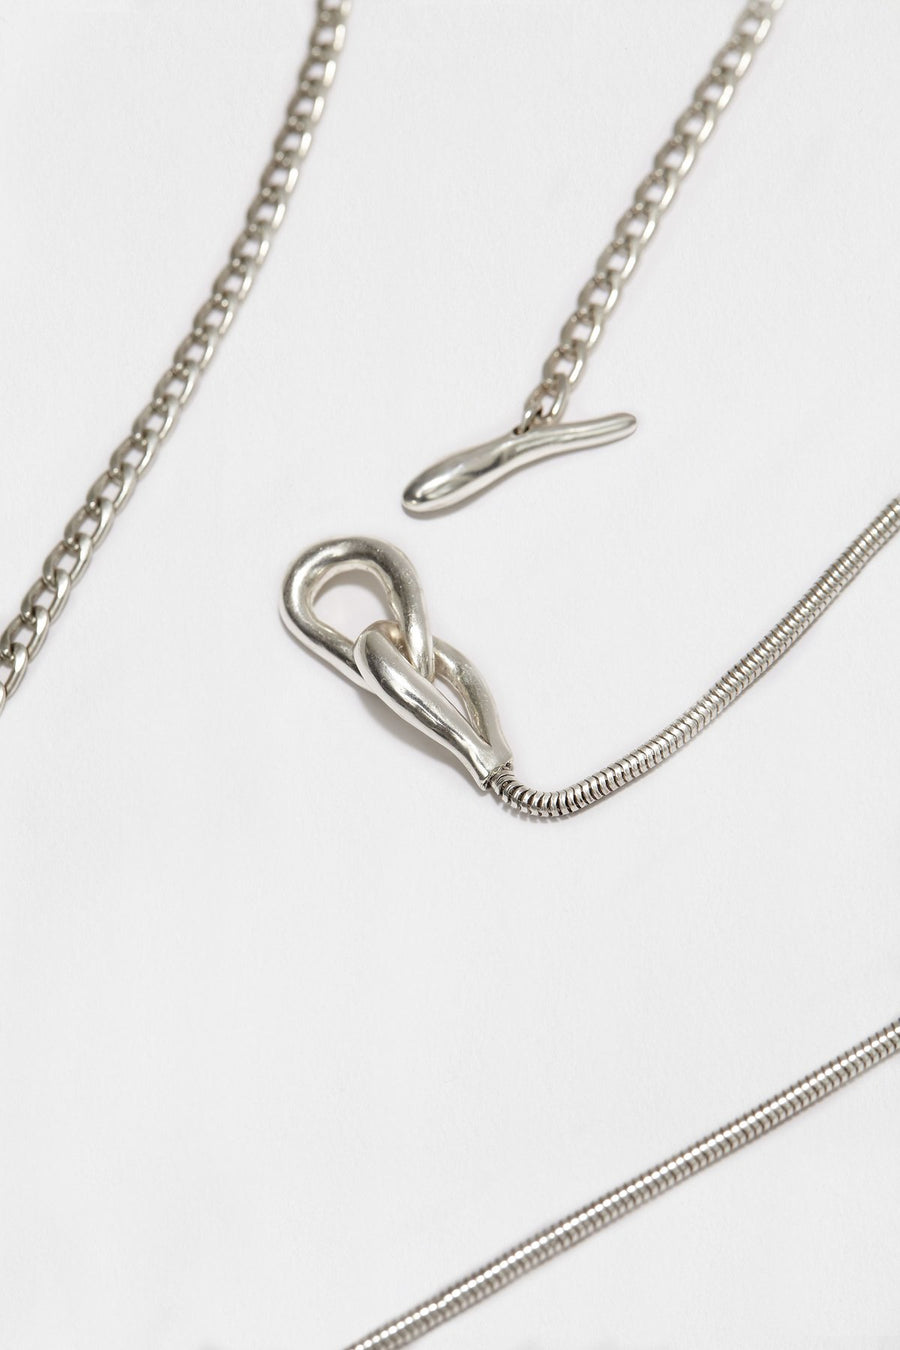 Hernan Herdez- Abrazo necklace-Jewellery-jewelry-Jeryco Store- London- Necklace-sterling silver necklace- recycled silver necklace- sustainable brand-necklaces for him- necklaces for her-necklaces that are unisex- two chain necklace-sterling silver necklace with toggle